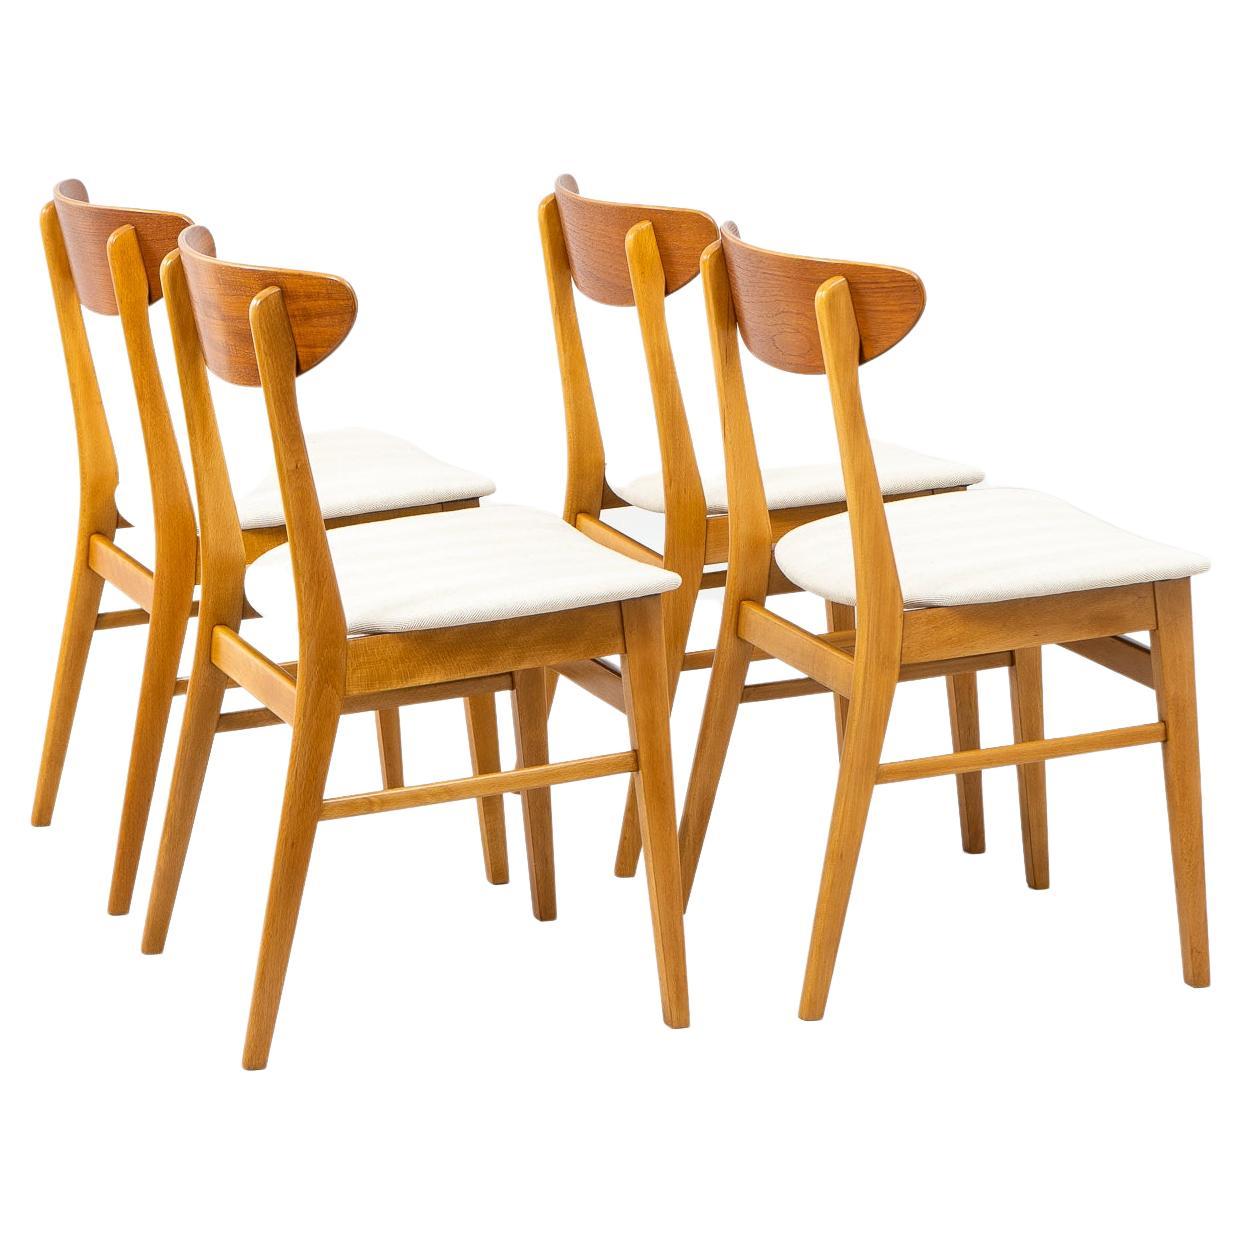 Set of 4 Teak and Beech Chairs Model 210 from Farstrup Stolefabrik, circa 1960 For Sale